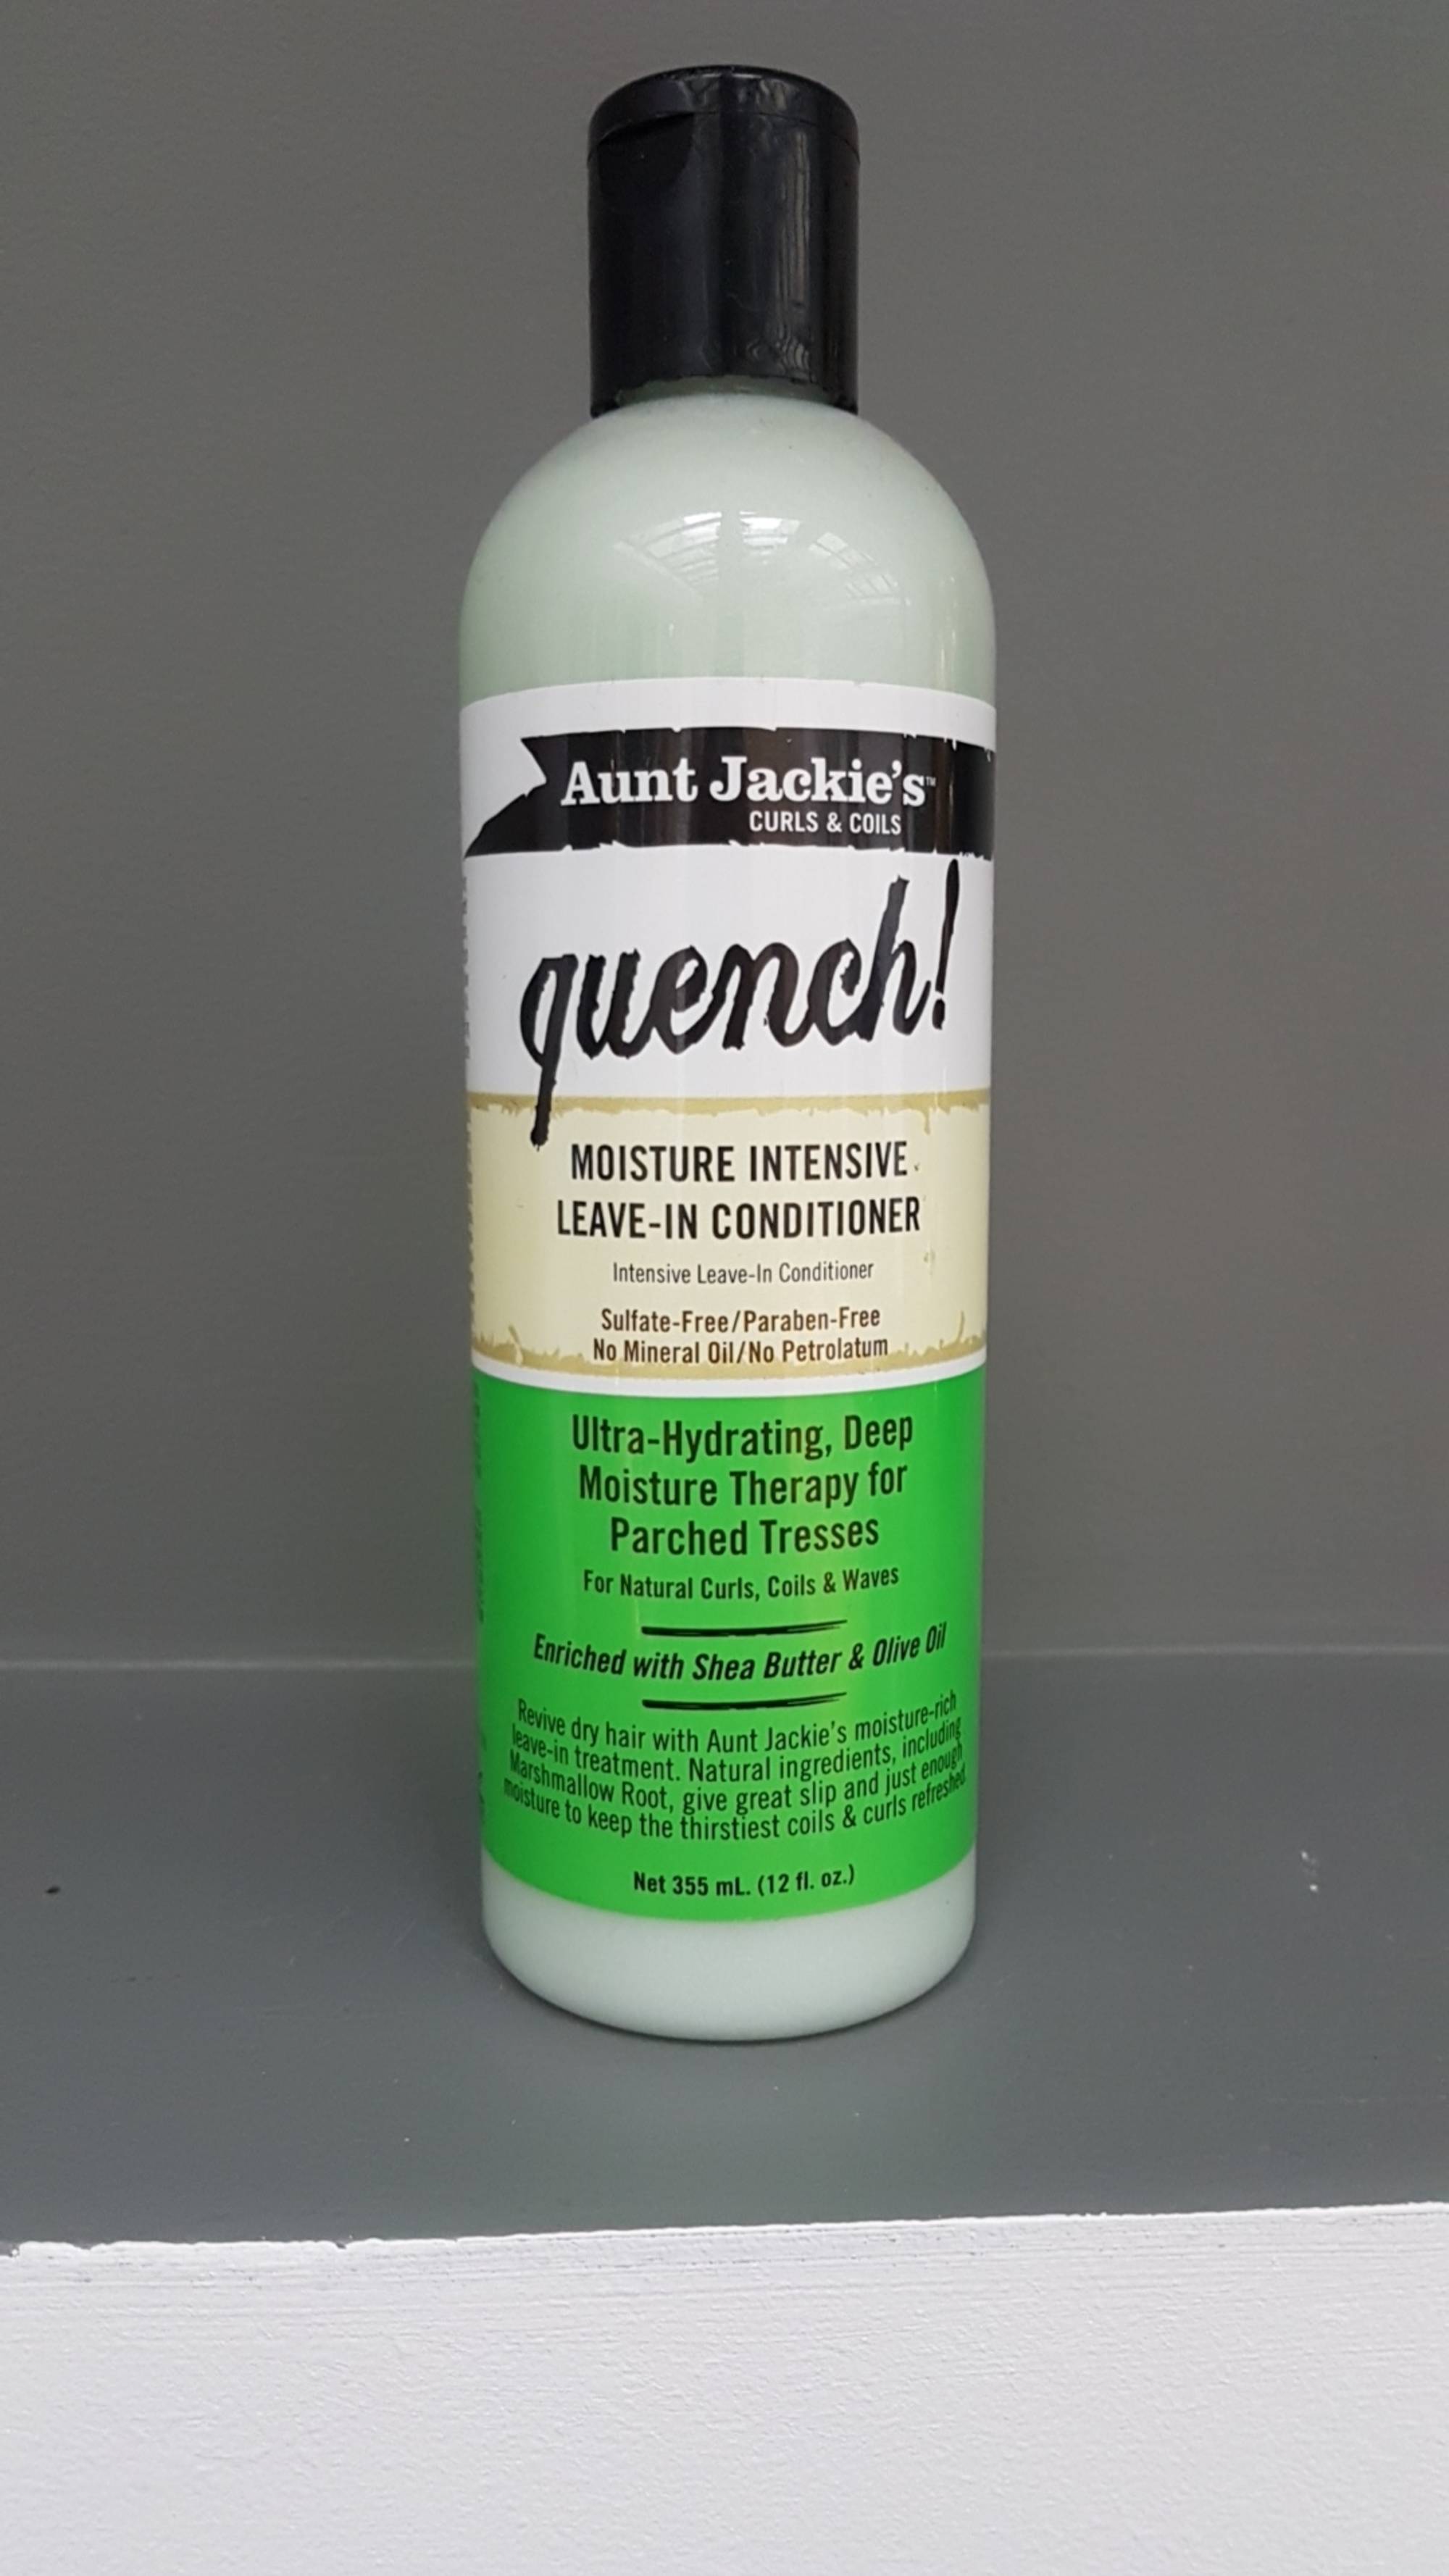 AUNT JACKIE'S CURLS & COILS - Quench! moisture intensive leave-in conditioner - ultra-hydrating